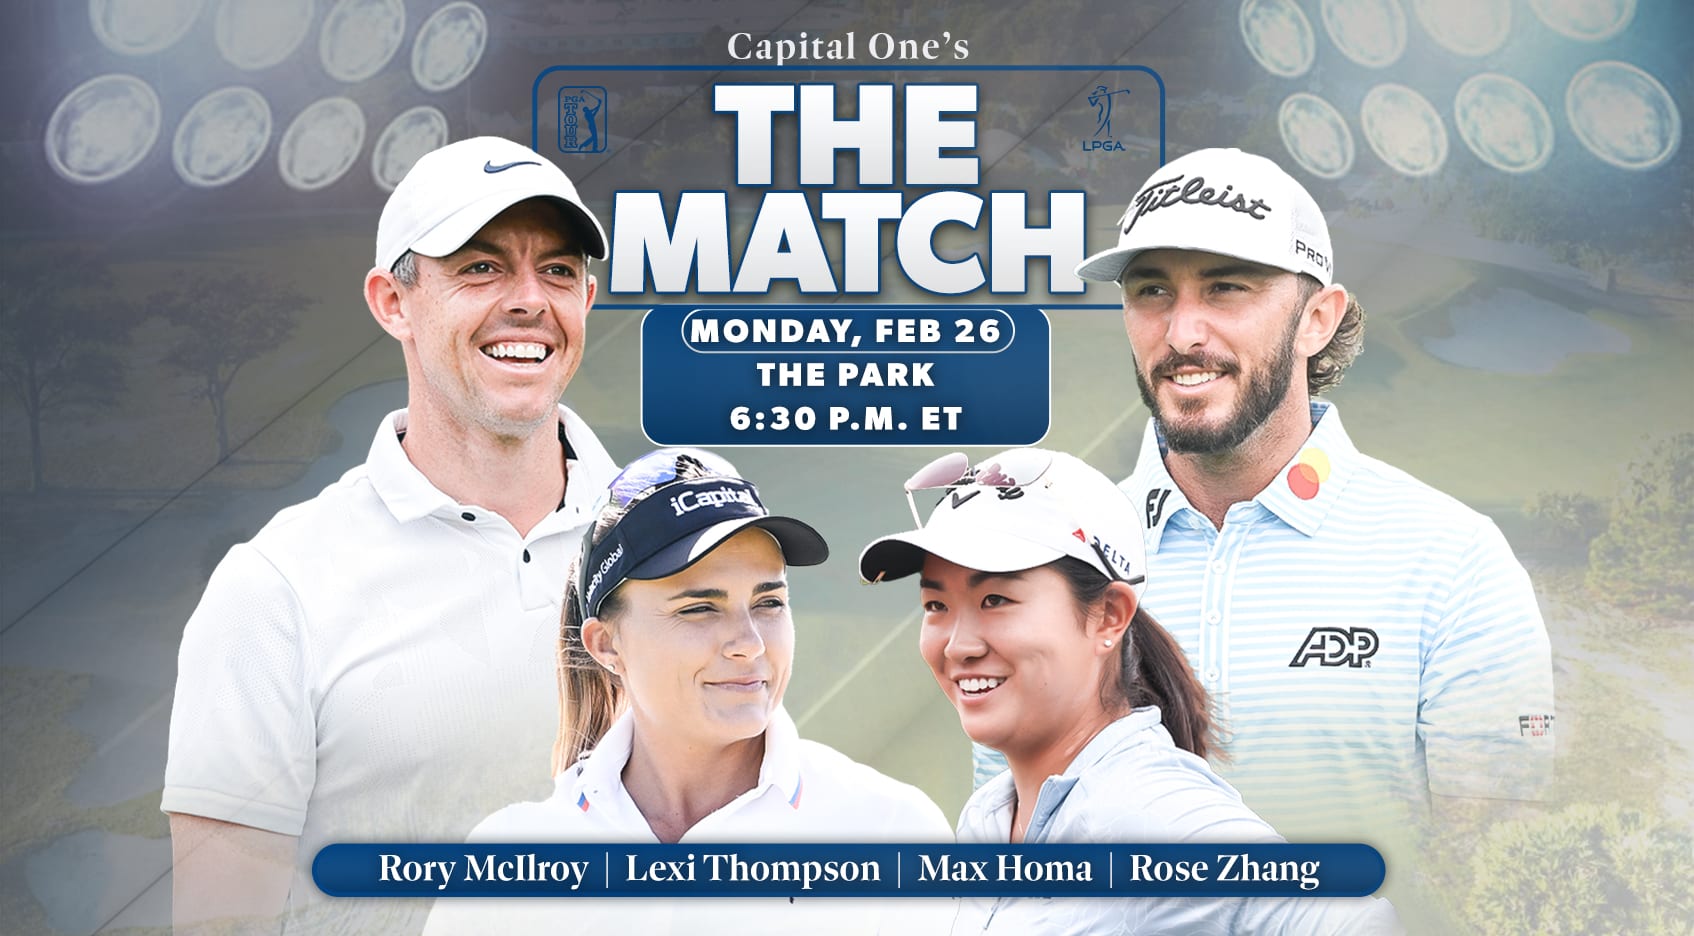 Rory McIlroy, Max Homa, Lexi Thompson, Rose Zhang ready for 'Capital One's  The Match' - PGA TOUR